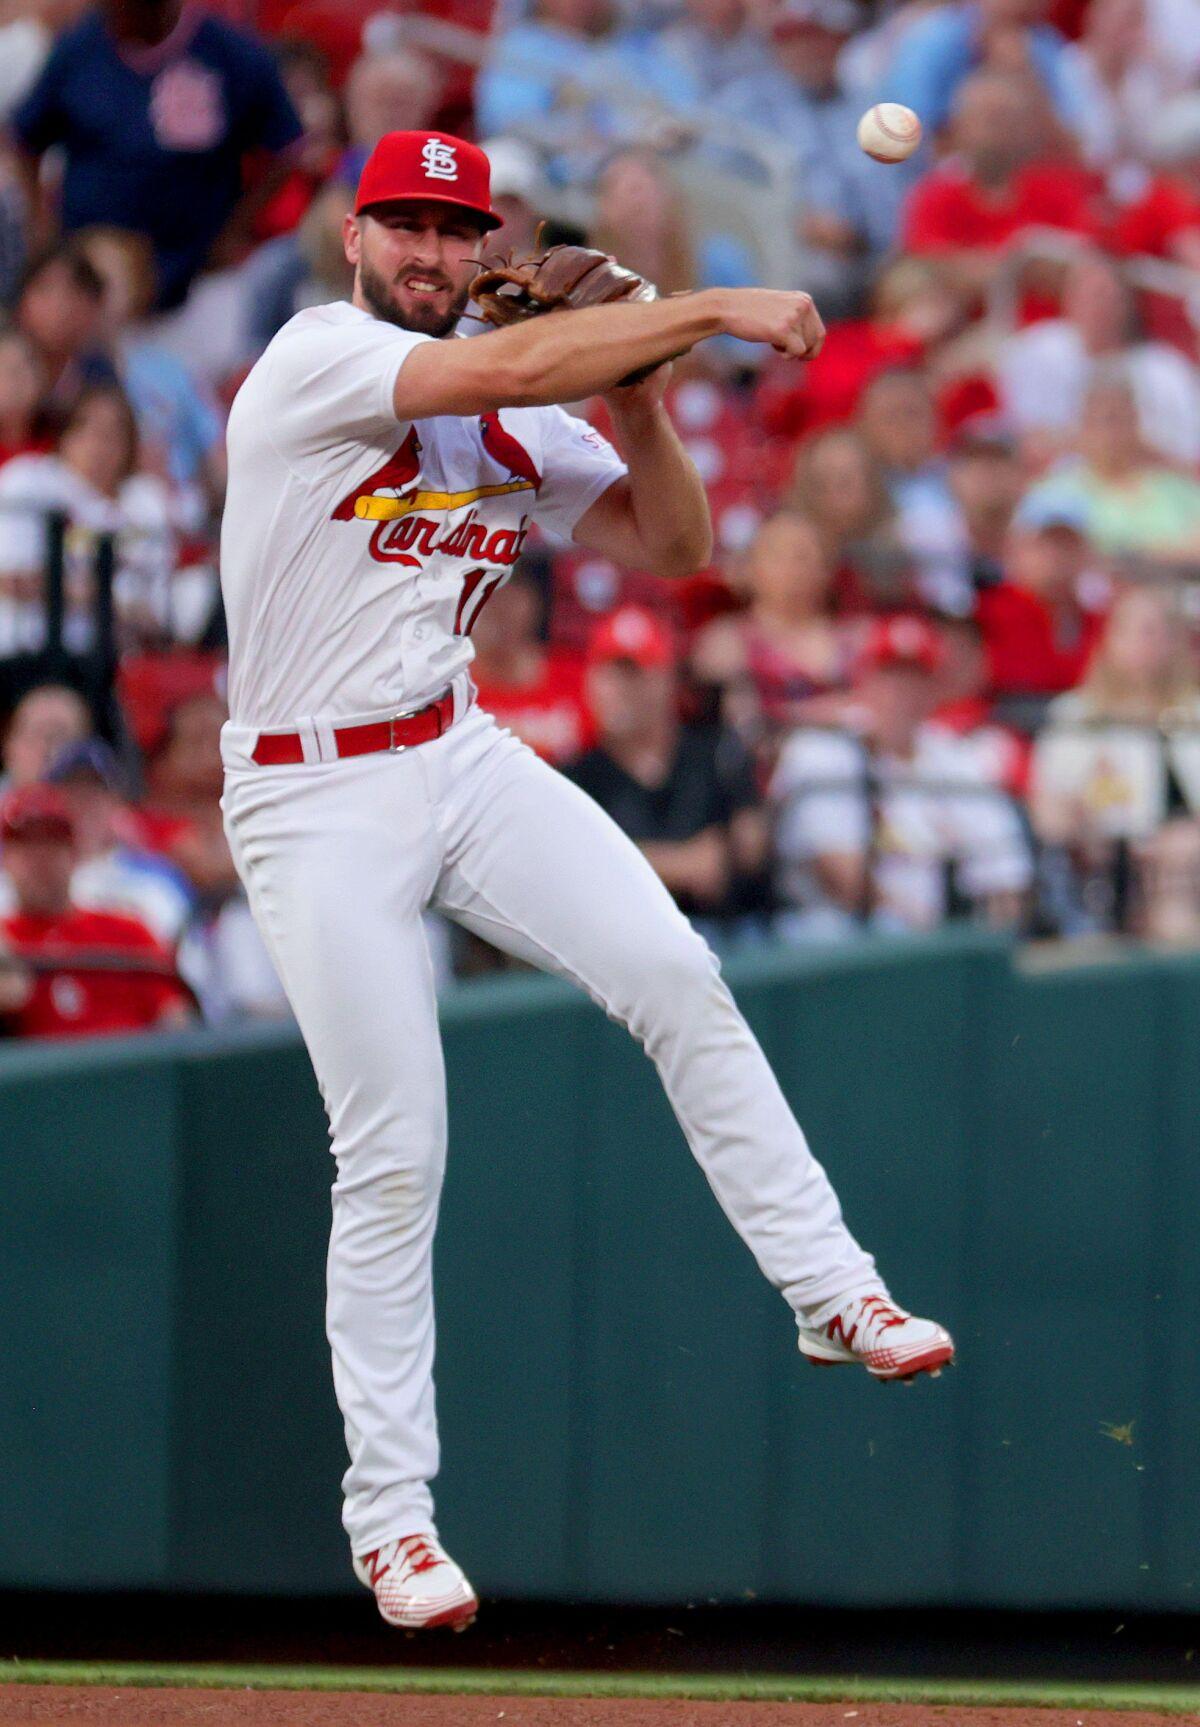 Jack set the tone': Flaherty delivers loud statement in Cardinals